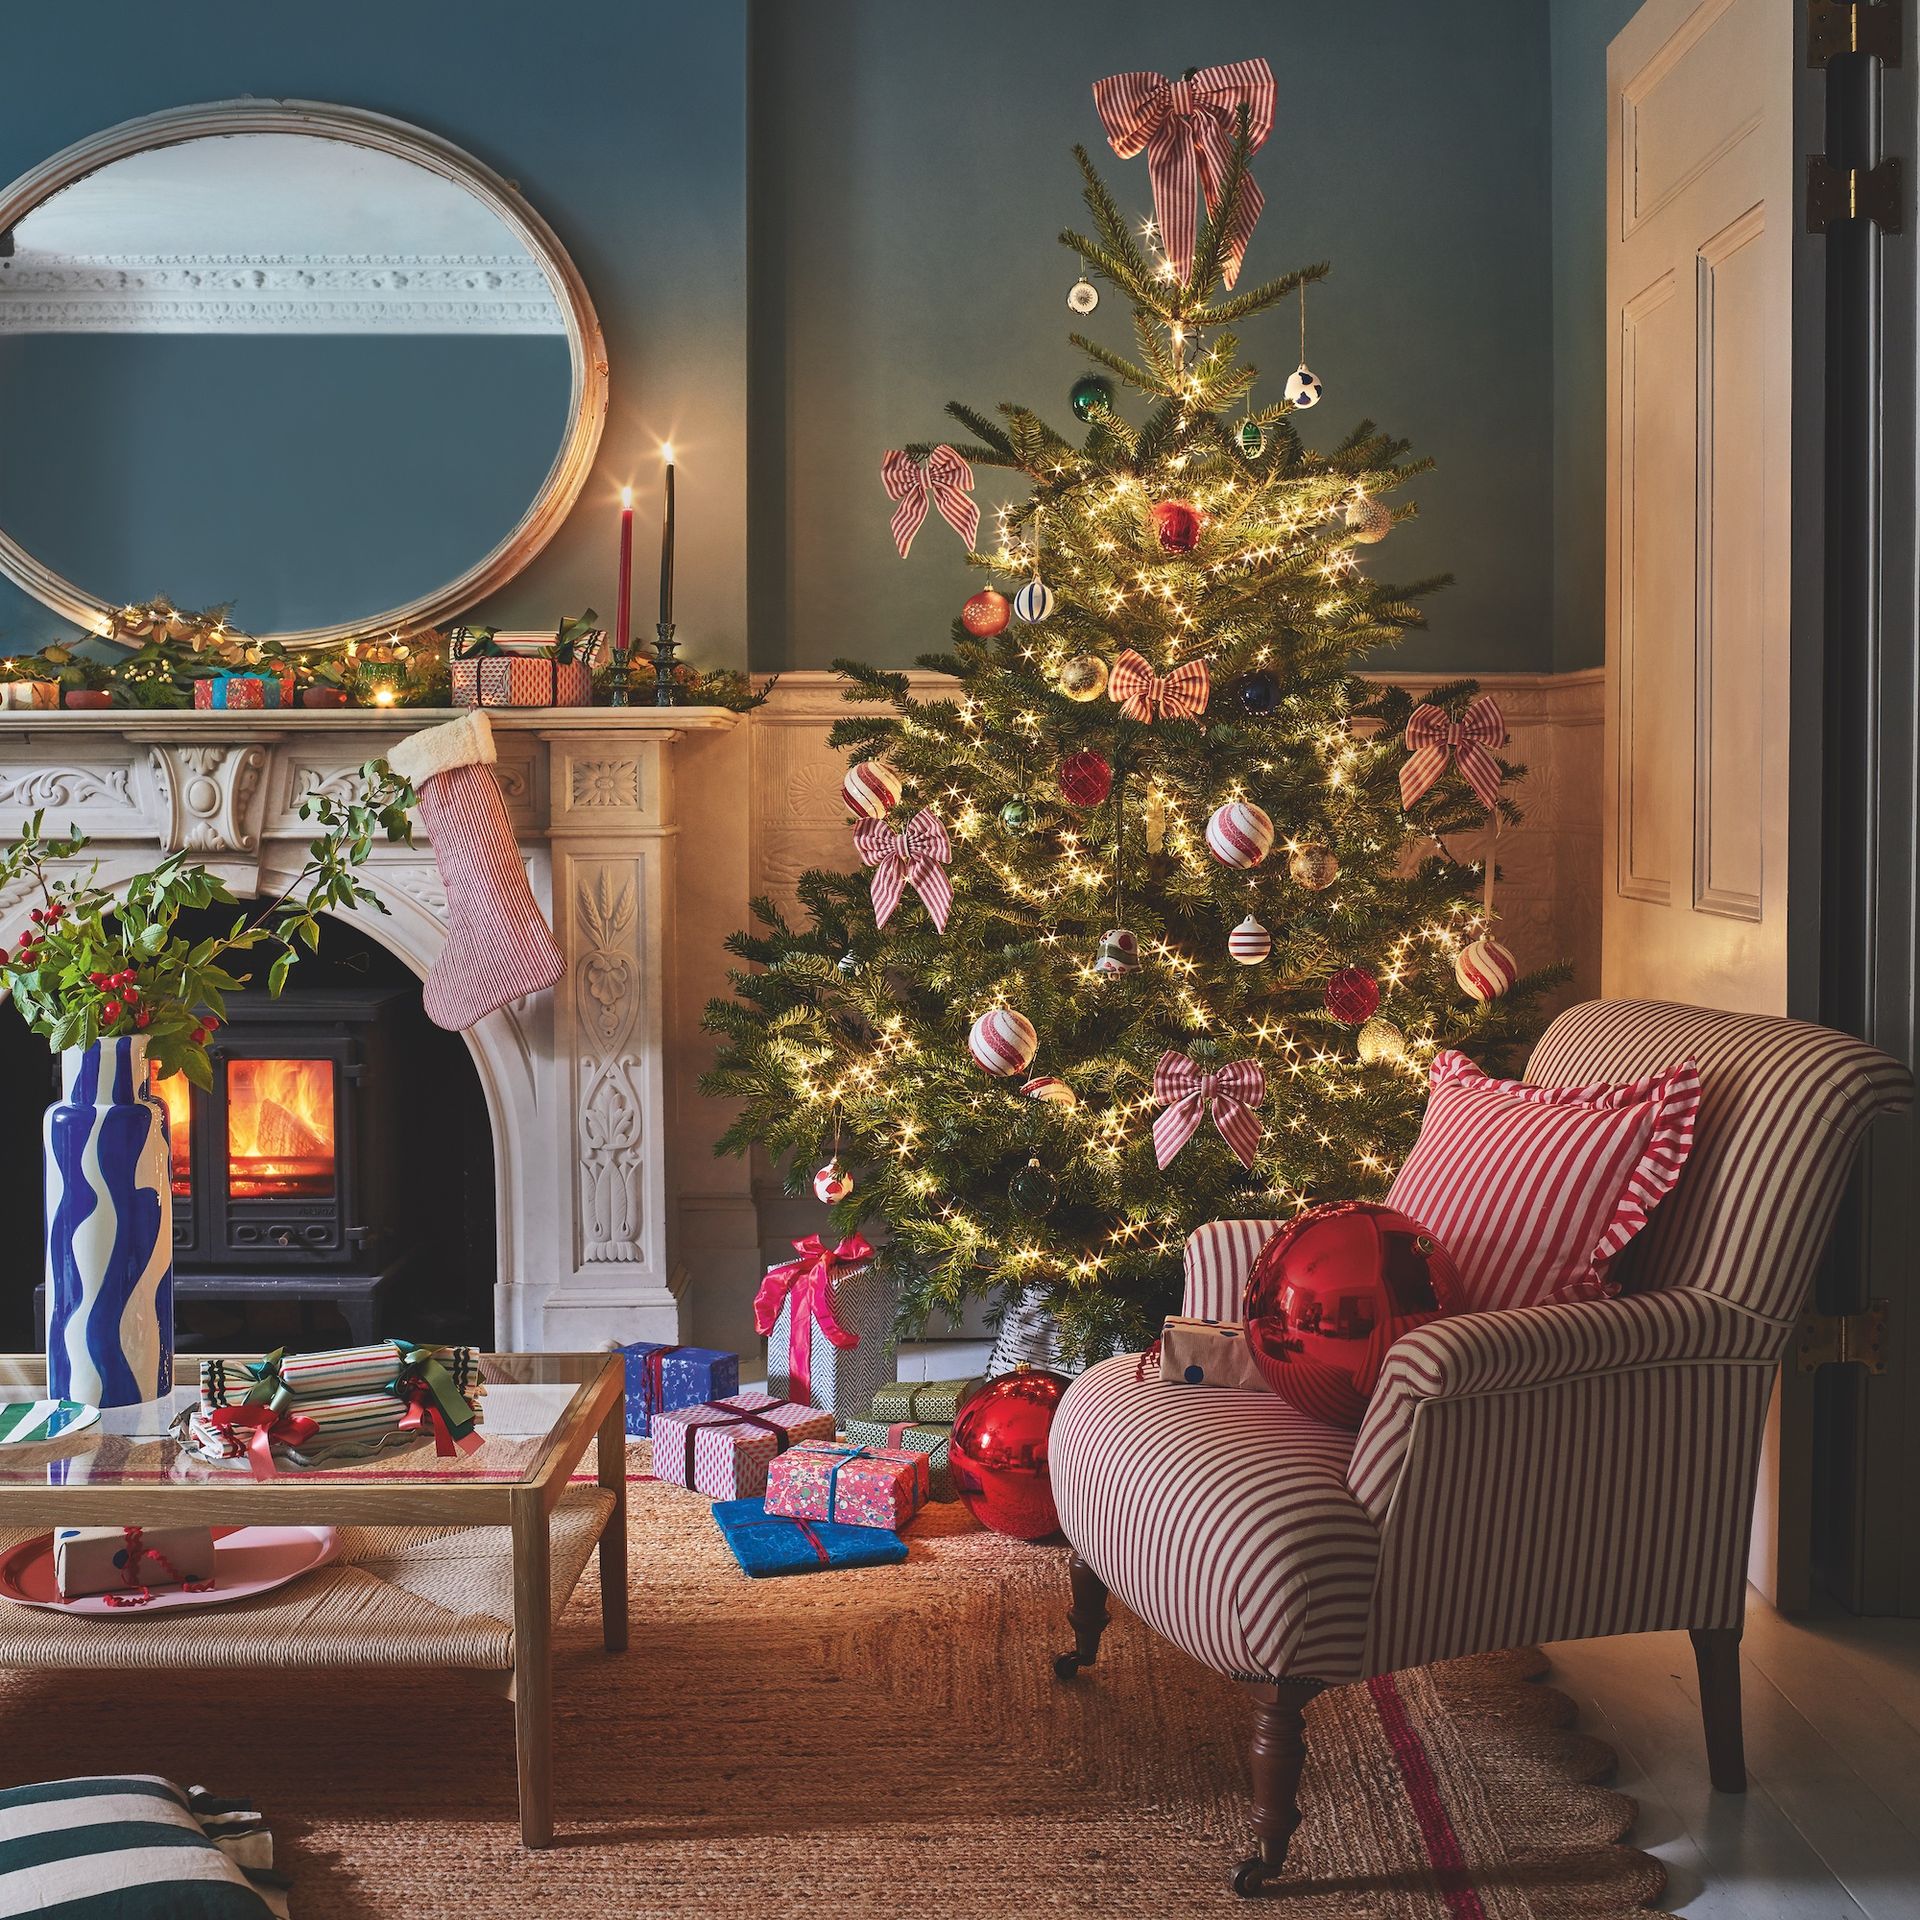 How to dispose of a Christmas tree sustainably | Ideal Home